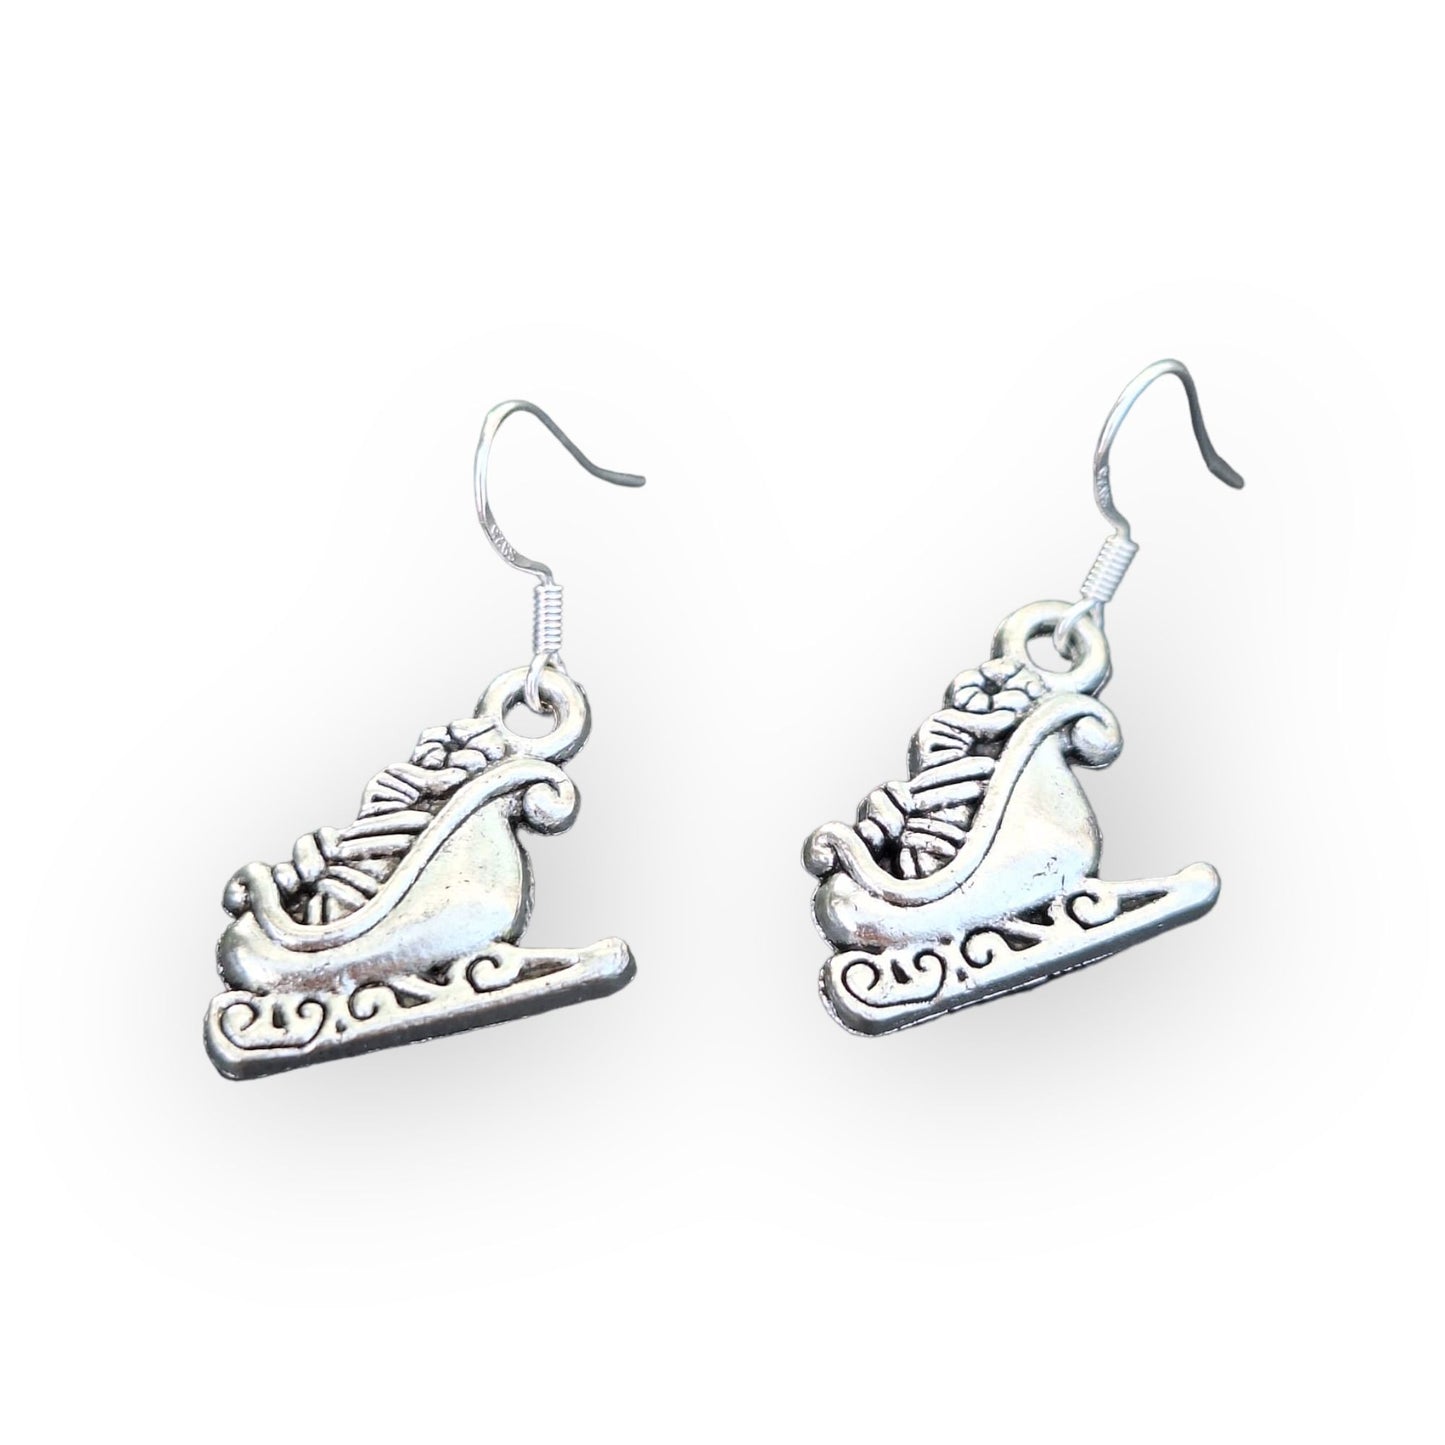 Antique Silver Sleigh Dangly Charm Earrings In Gift Bag, Winter, Christmas, Gifts For Her - Premium  from Etsy - Just £4.99! Shop now at Uniquely Holt